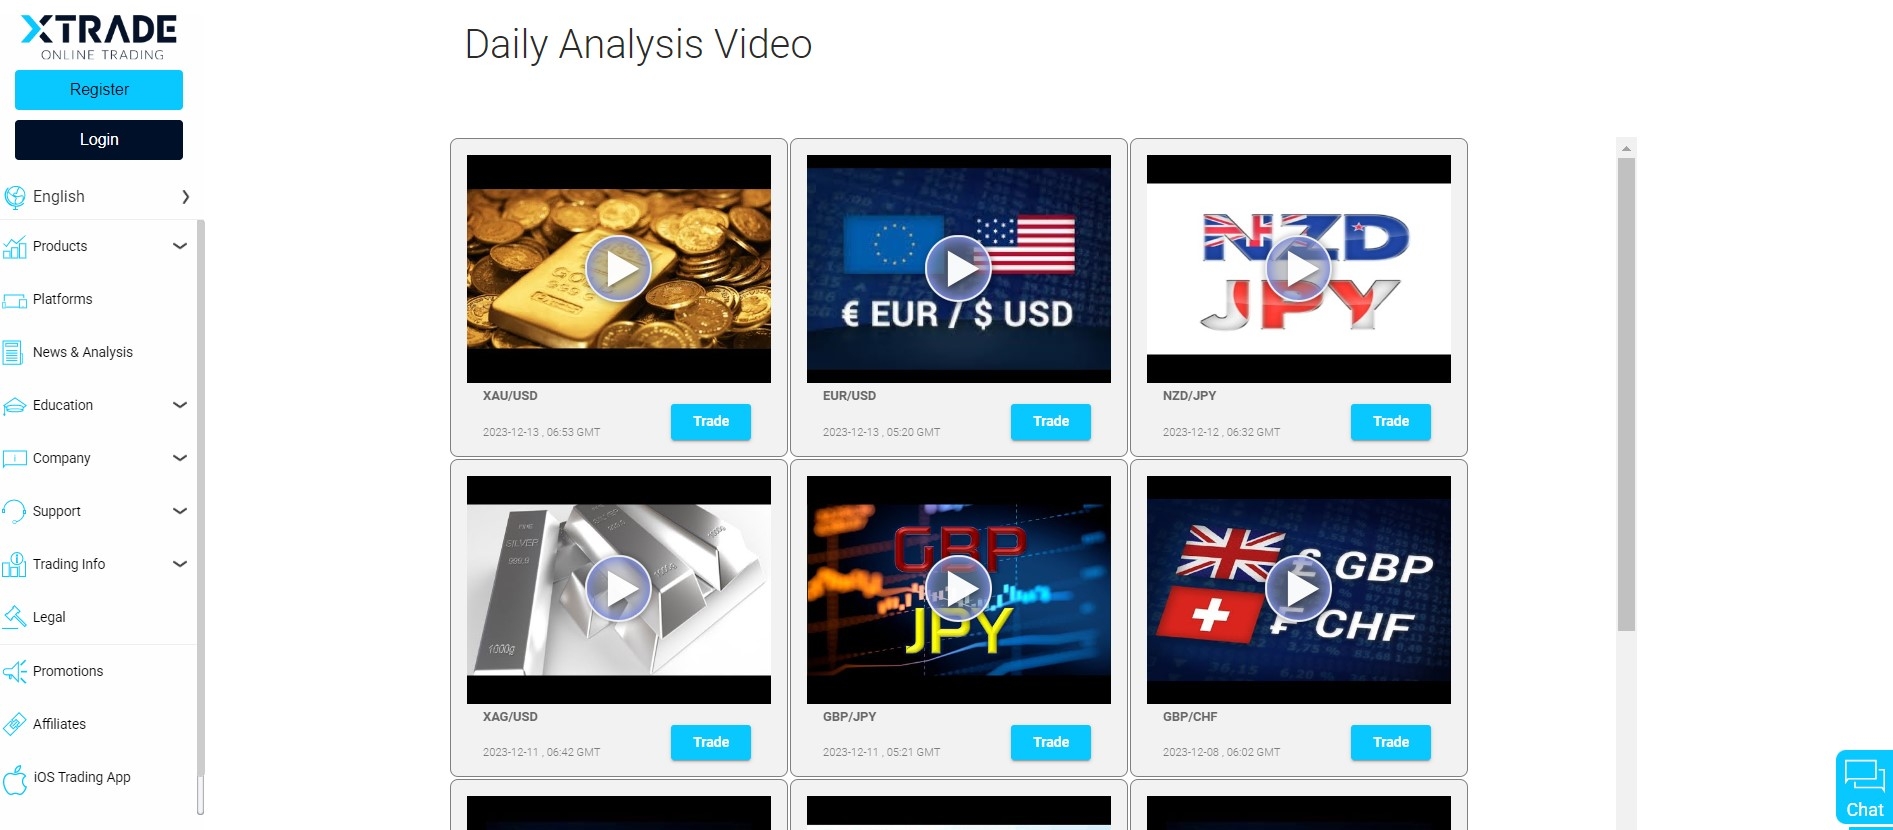 Video analytics by Xtrade